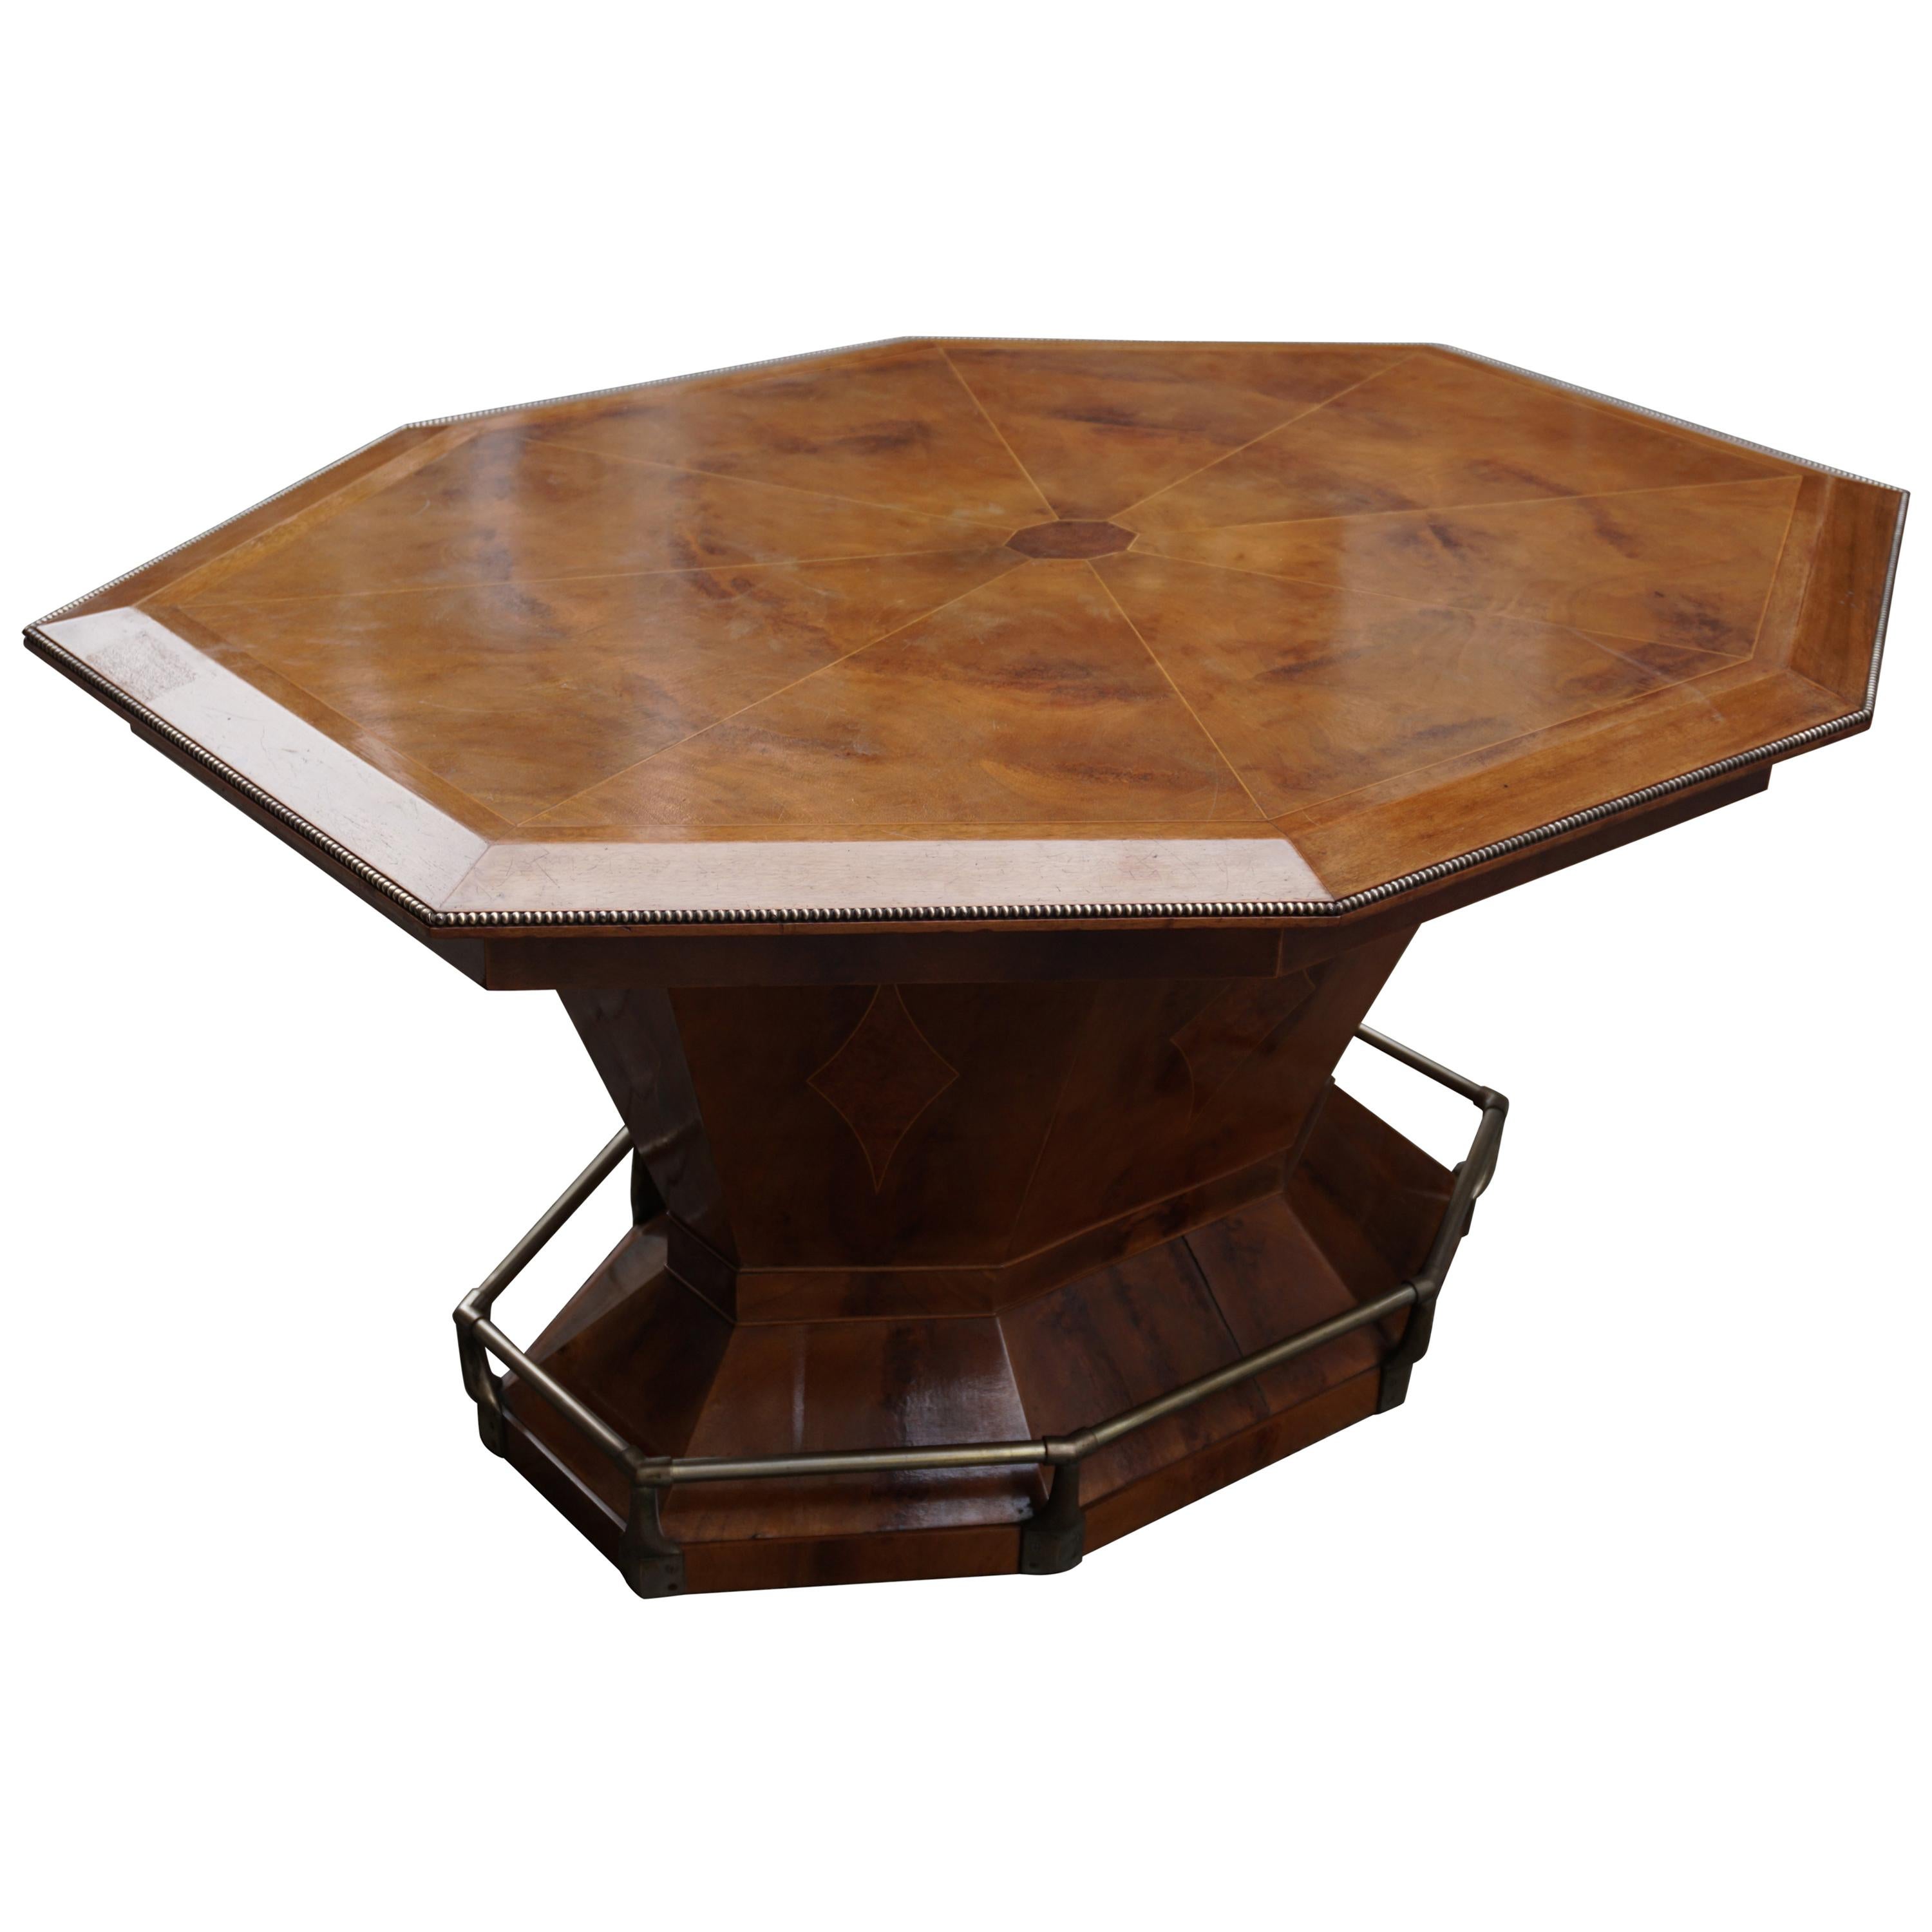 Beautiful Hollywood Regency Belgium Art Deco octagonal dining table or desk and writing table. Made in the 1920s for a prominent Jewish family from Antwerp working in the diamond industry. Antwerp, Belgium is the diamond capital of the world. Made